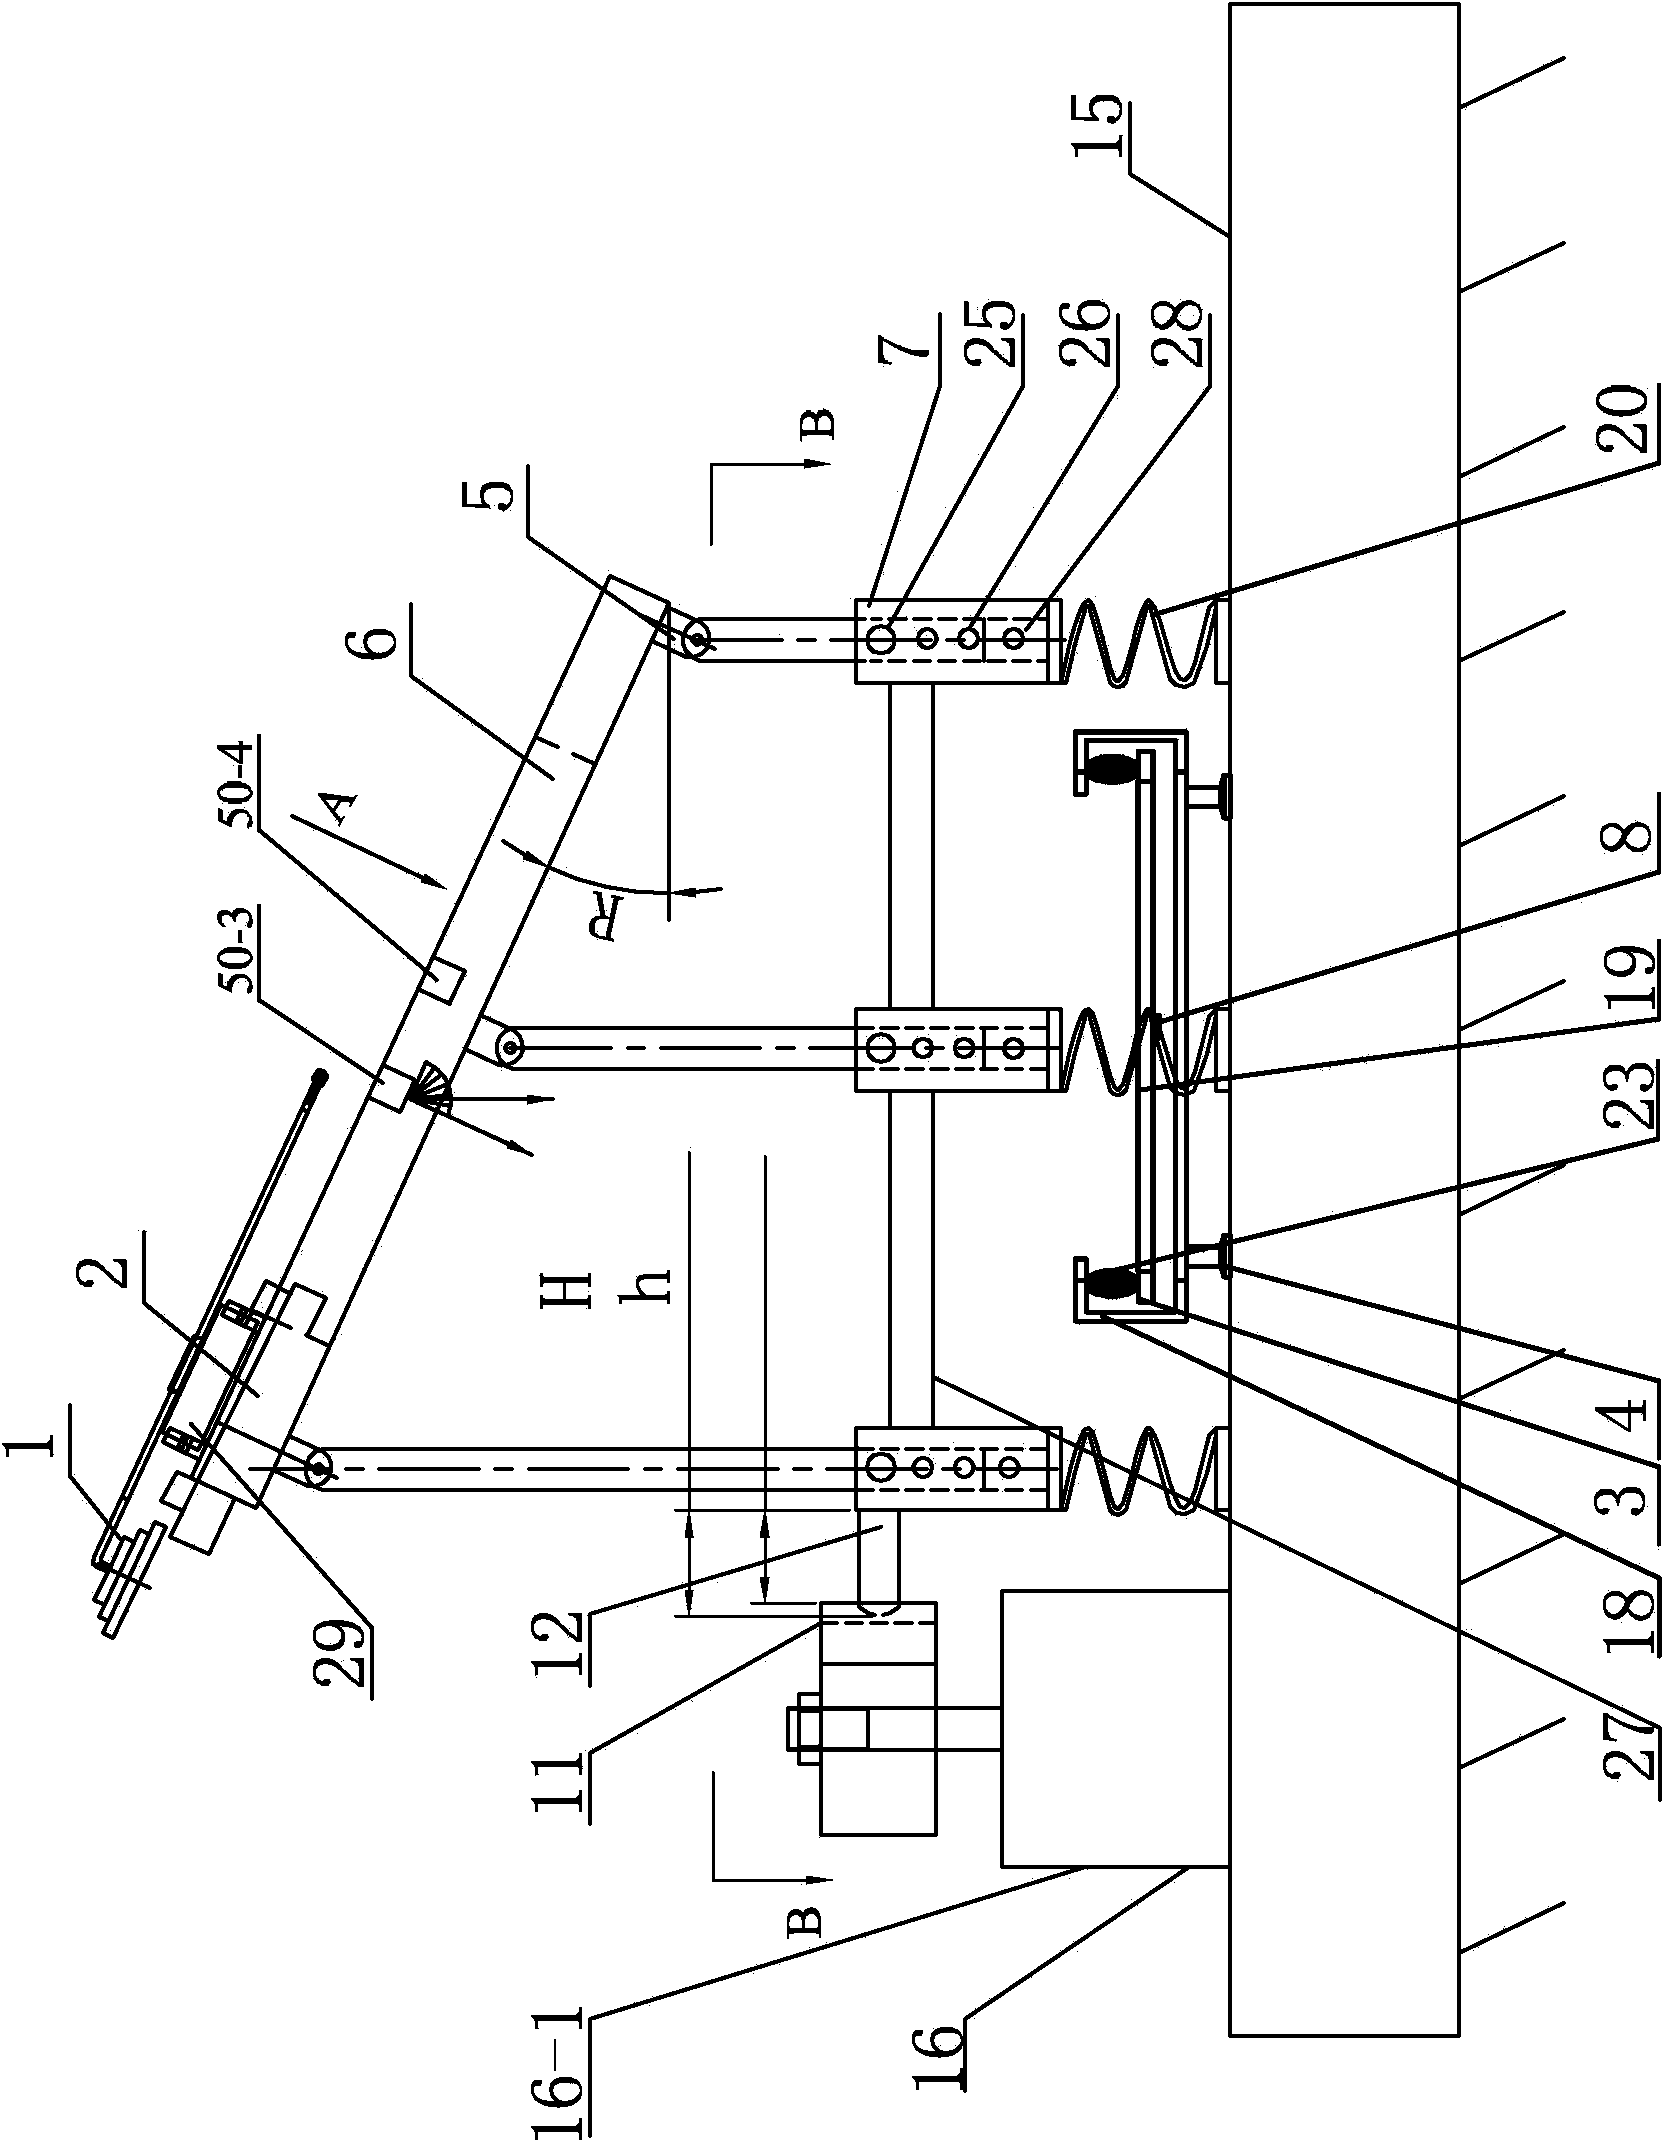 Laser-type super-equal-length weight throw core stable force training and information feedback device